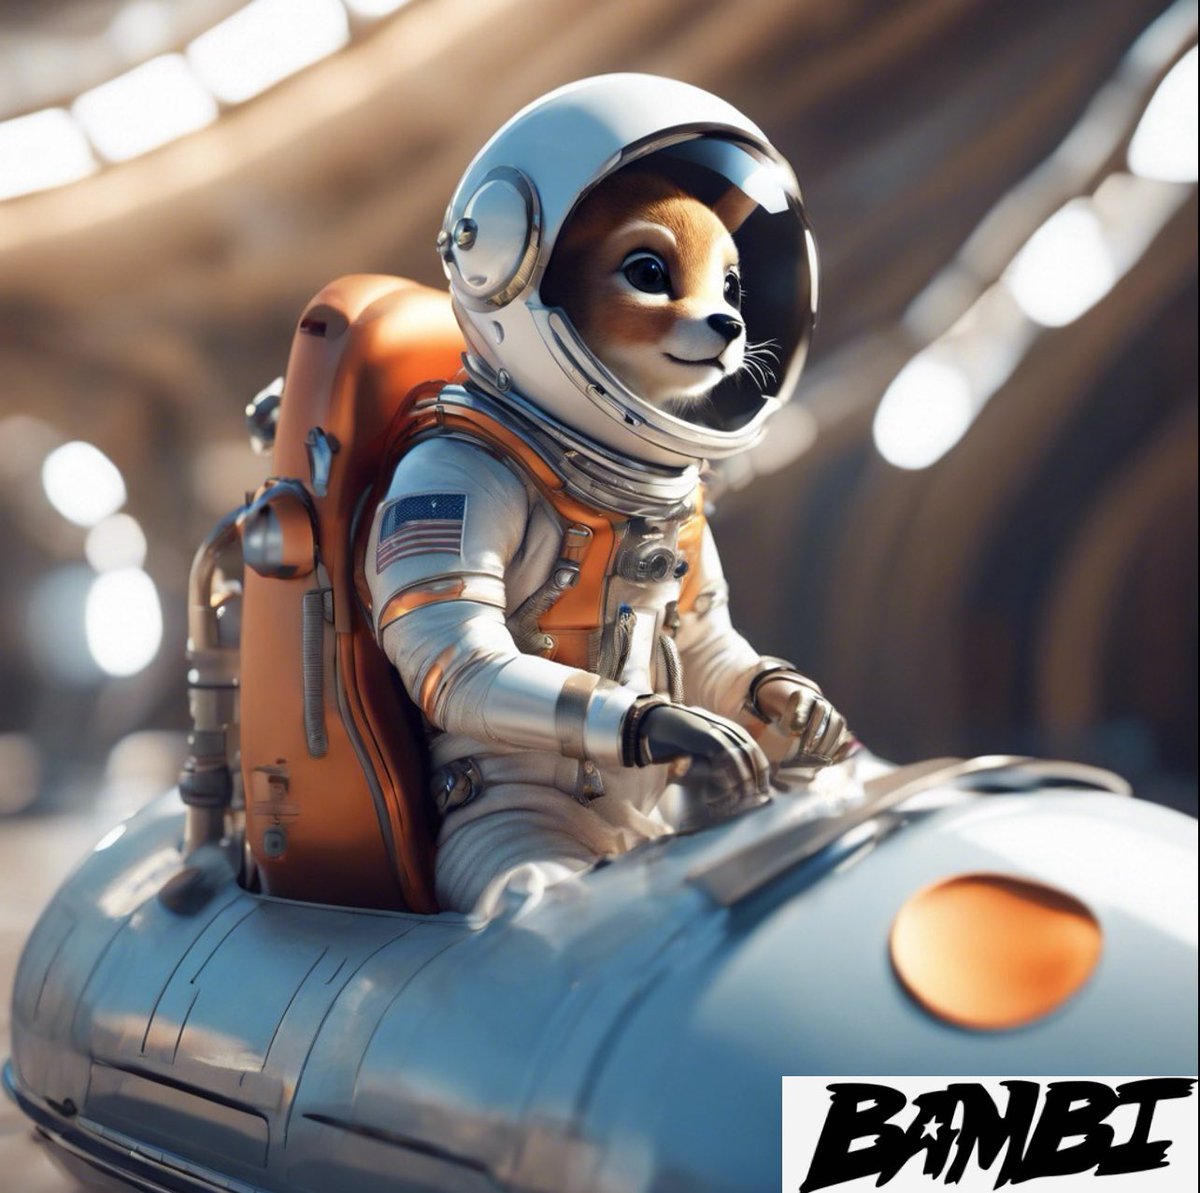 Contemplating the limitless potential of $BAM, seated on a rocket of opportunity. 🚀 Exciting times ahead BamFam! #BAM #Crypto #MemeCoinSeason #Investing #BullishMindset